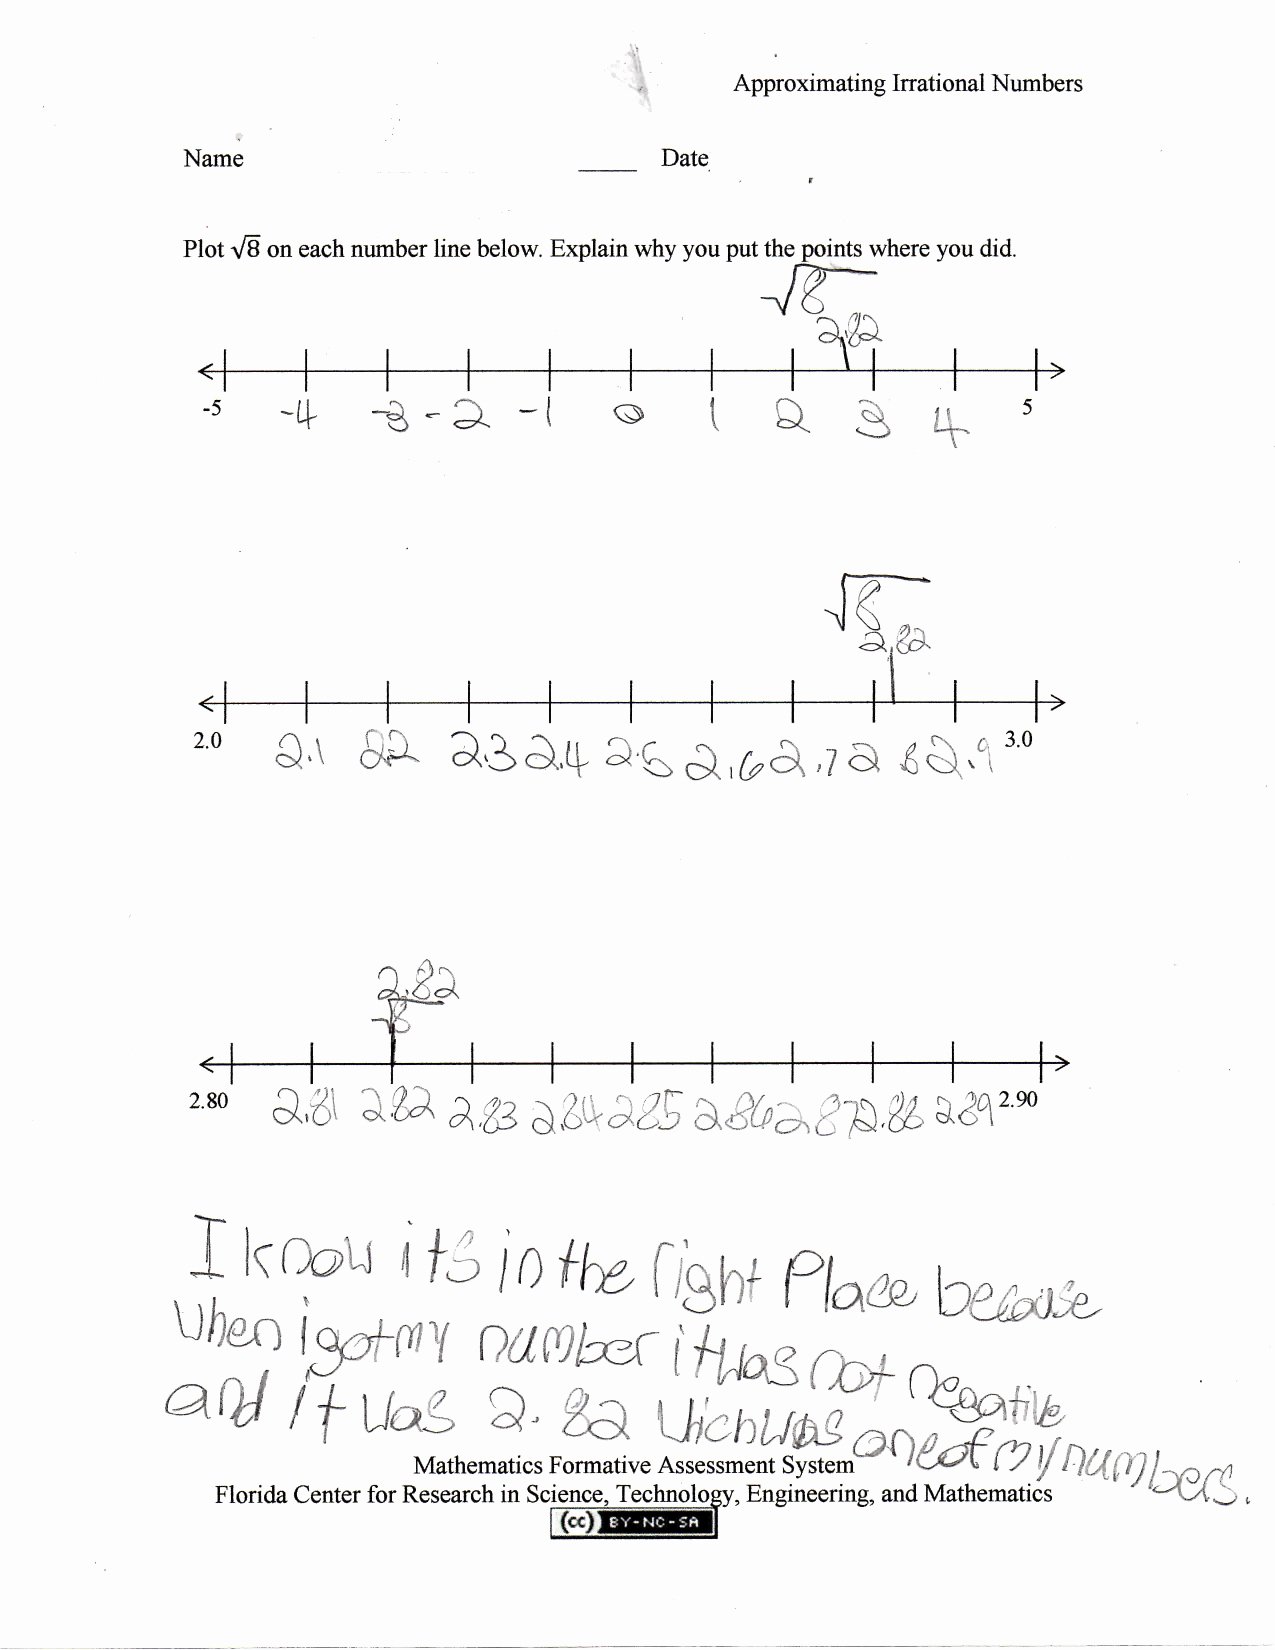 Rational and Irrational Numbers Worksheet Beautiful Approximating Irrational Numbers